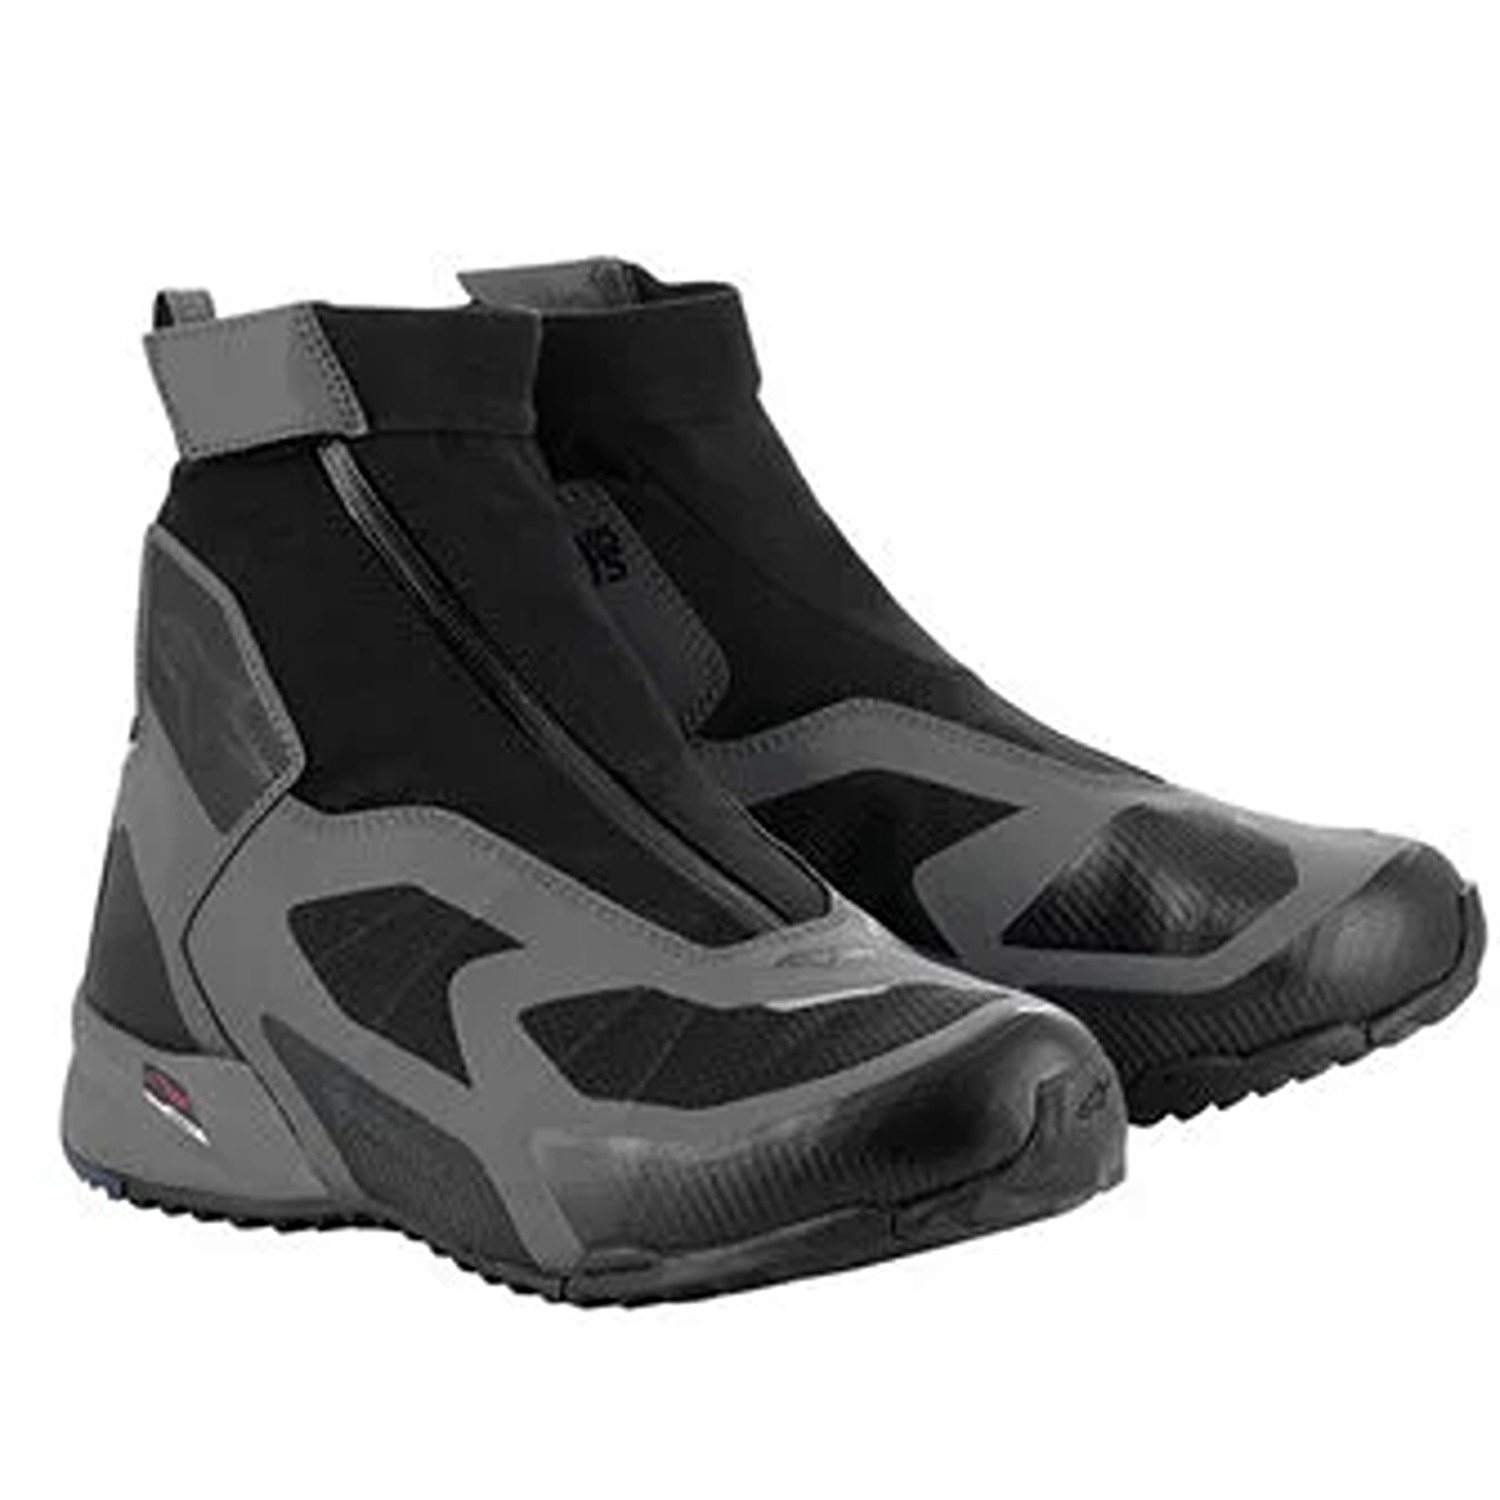 Image of Alpinestars CR-8 Gore-Tex Shoes Black Mid Gray Bright Red Size US 11 ID 8059347260211